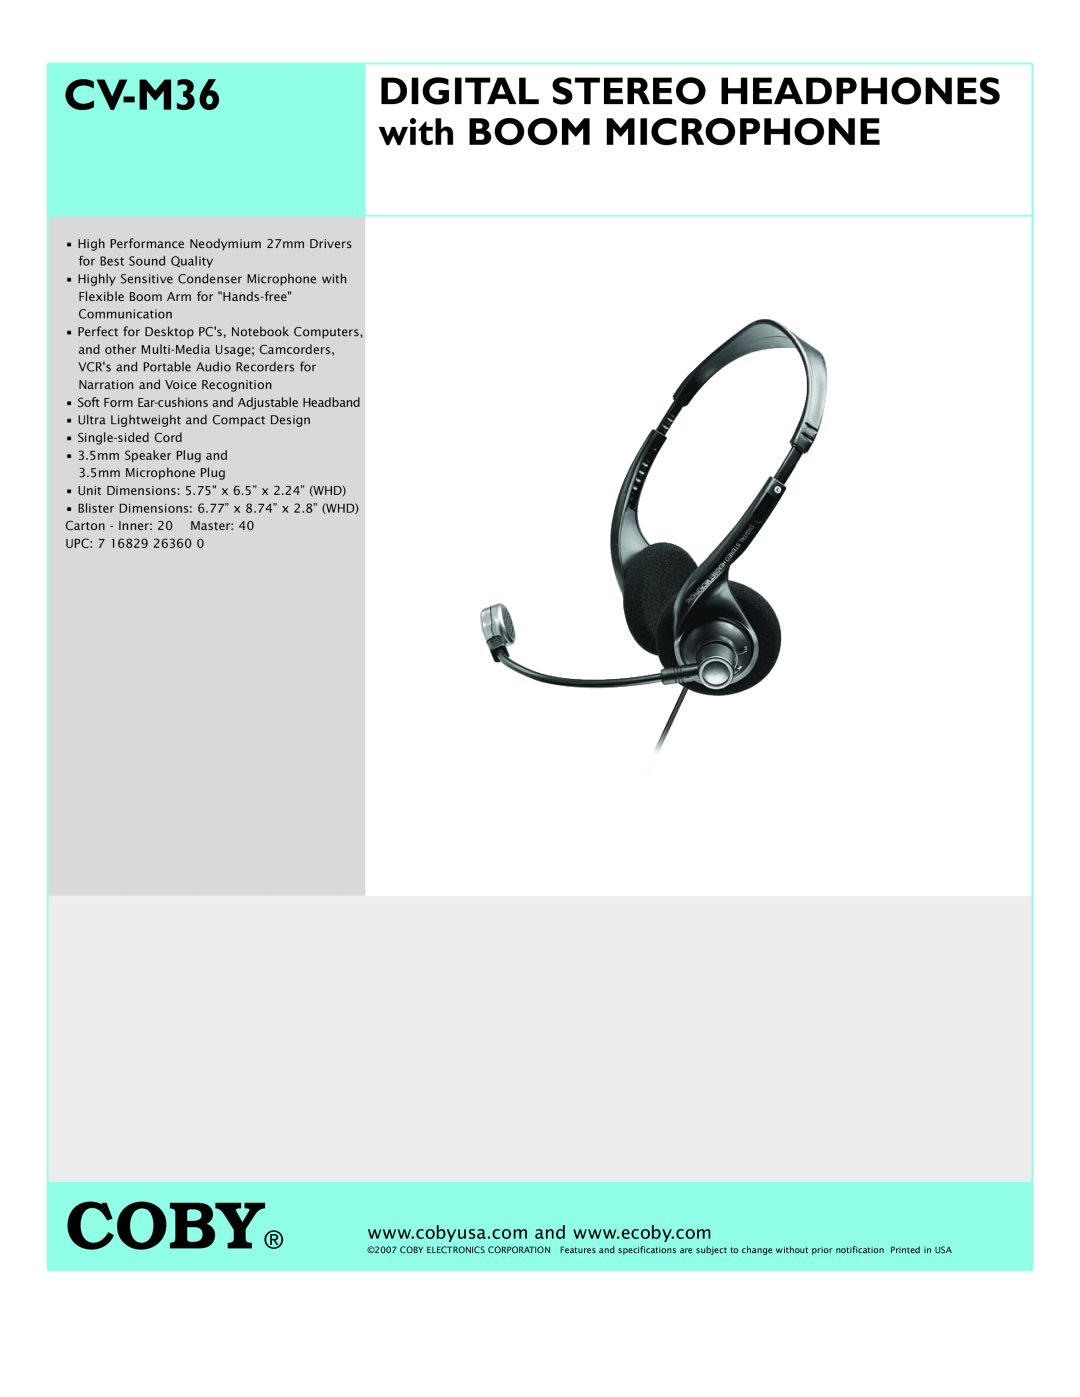 COBY electronic CV M36 specifications Coby, CV-M36, DIGITAL STEREO HEADPHONES with BOOM MICROPHONE 